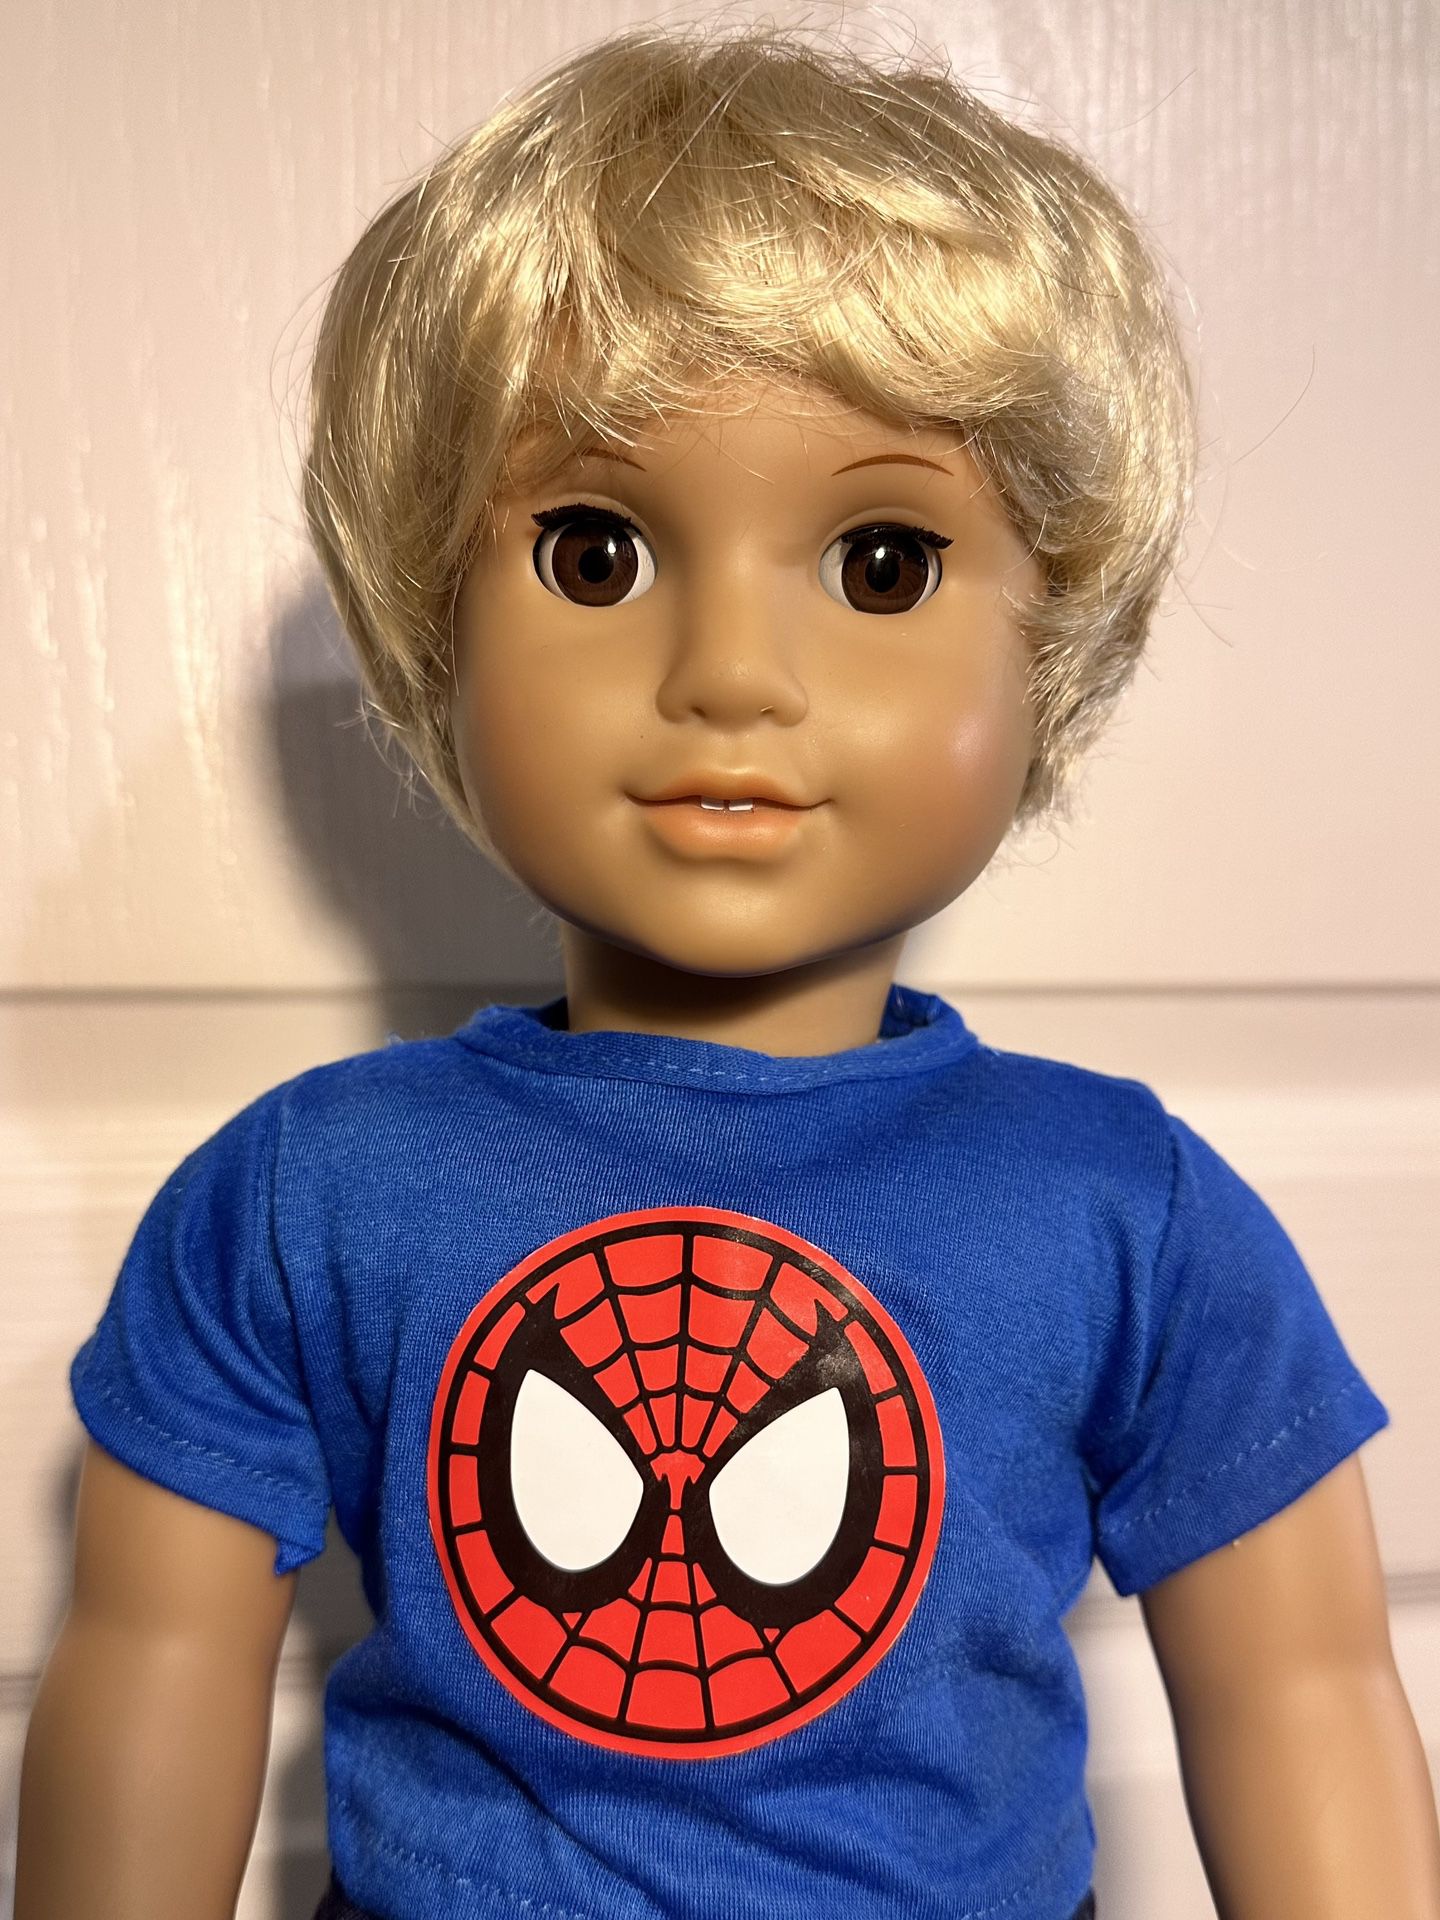 Custom-Made American Girl Doll Boy Blonde Hair Brown Eyes Outfit Spider-Man Gift